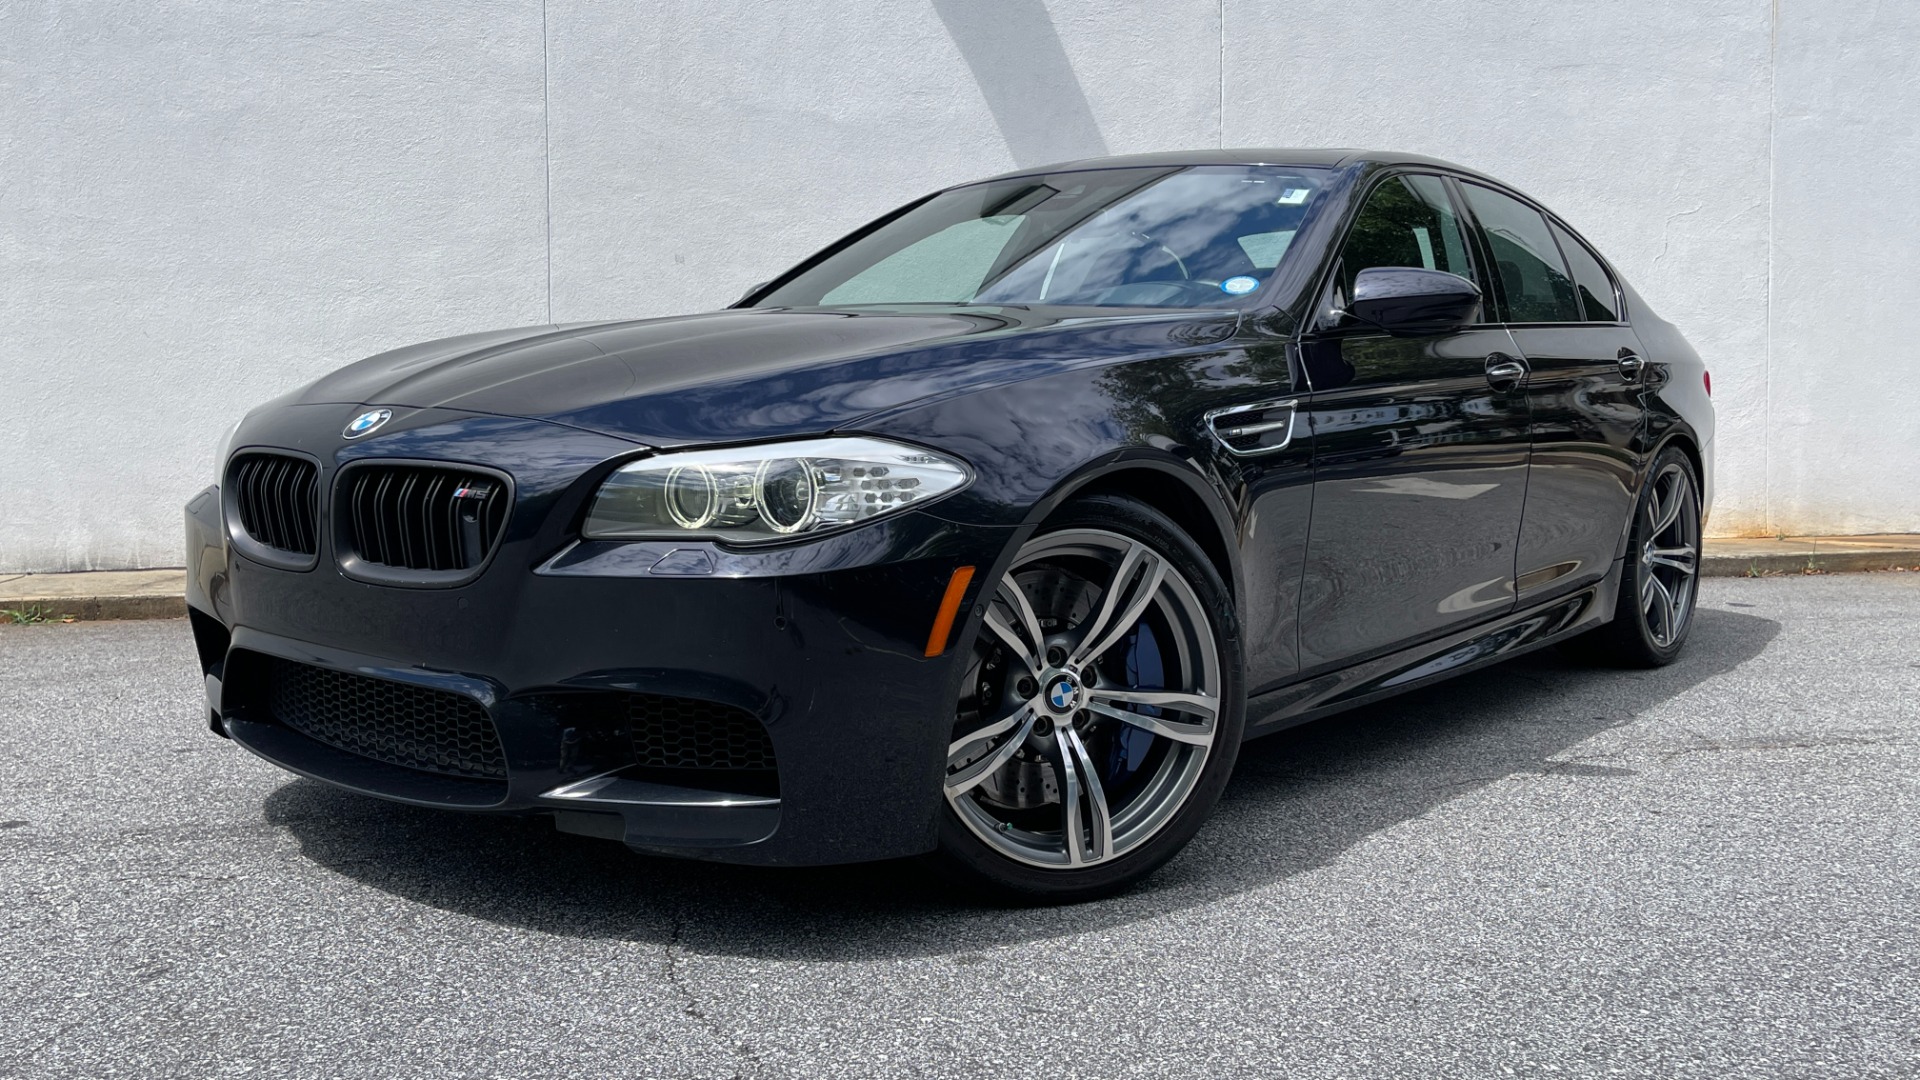 Used 2013 BMW M5 EXECUTIVE PKG / DRVR ASST / NAV / SUNROOF / REARVIEW for sale Sold at Formula Imports in Charlotte NC 28227 1